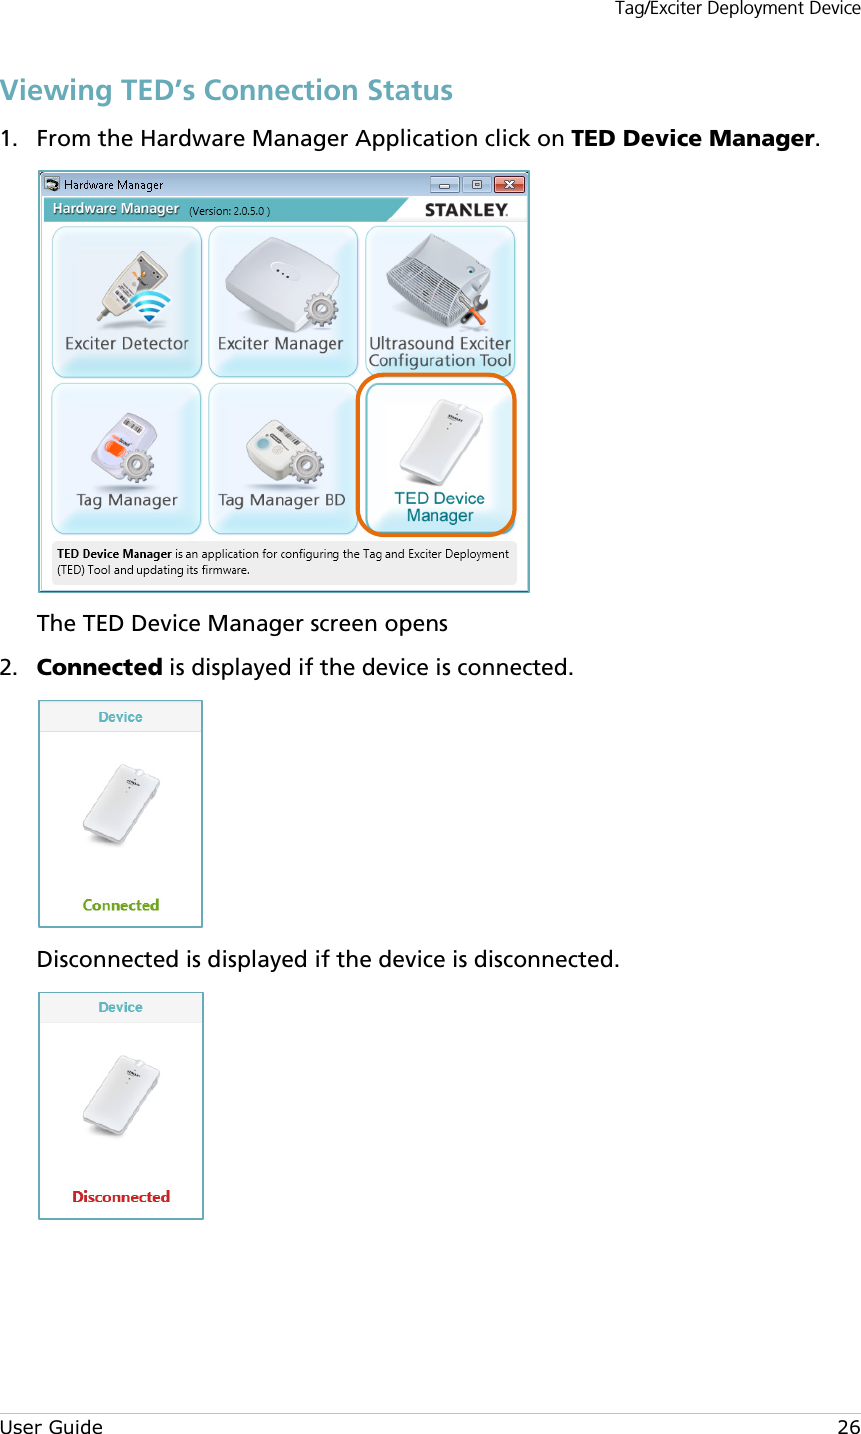 Tag/Exciter Deployment Device User Guide 26 Viewing TED’s Connection Status  From the Hardware Manager Application click on TED Device Manager. 1. The TED Device Manager screen opens  Connected is displayed if the device is connected. 2. Disconnected is displayed if the device is disconnected.    